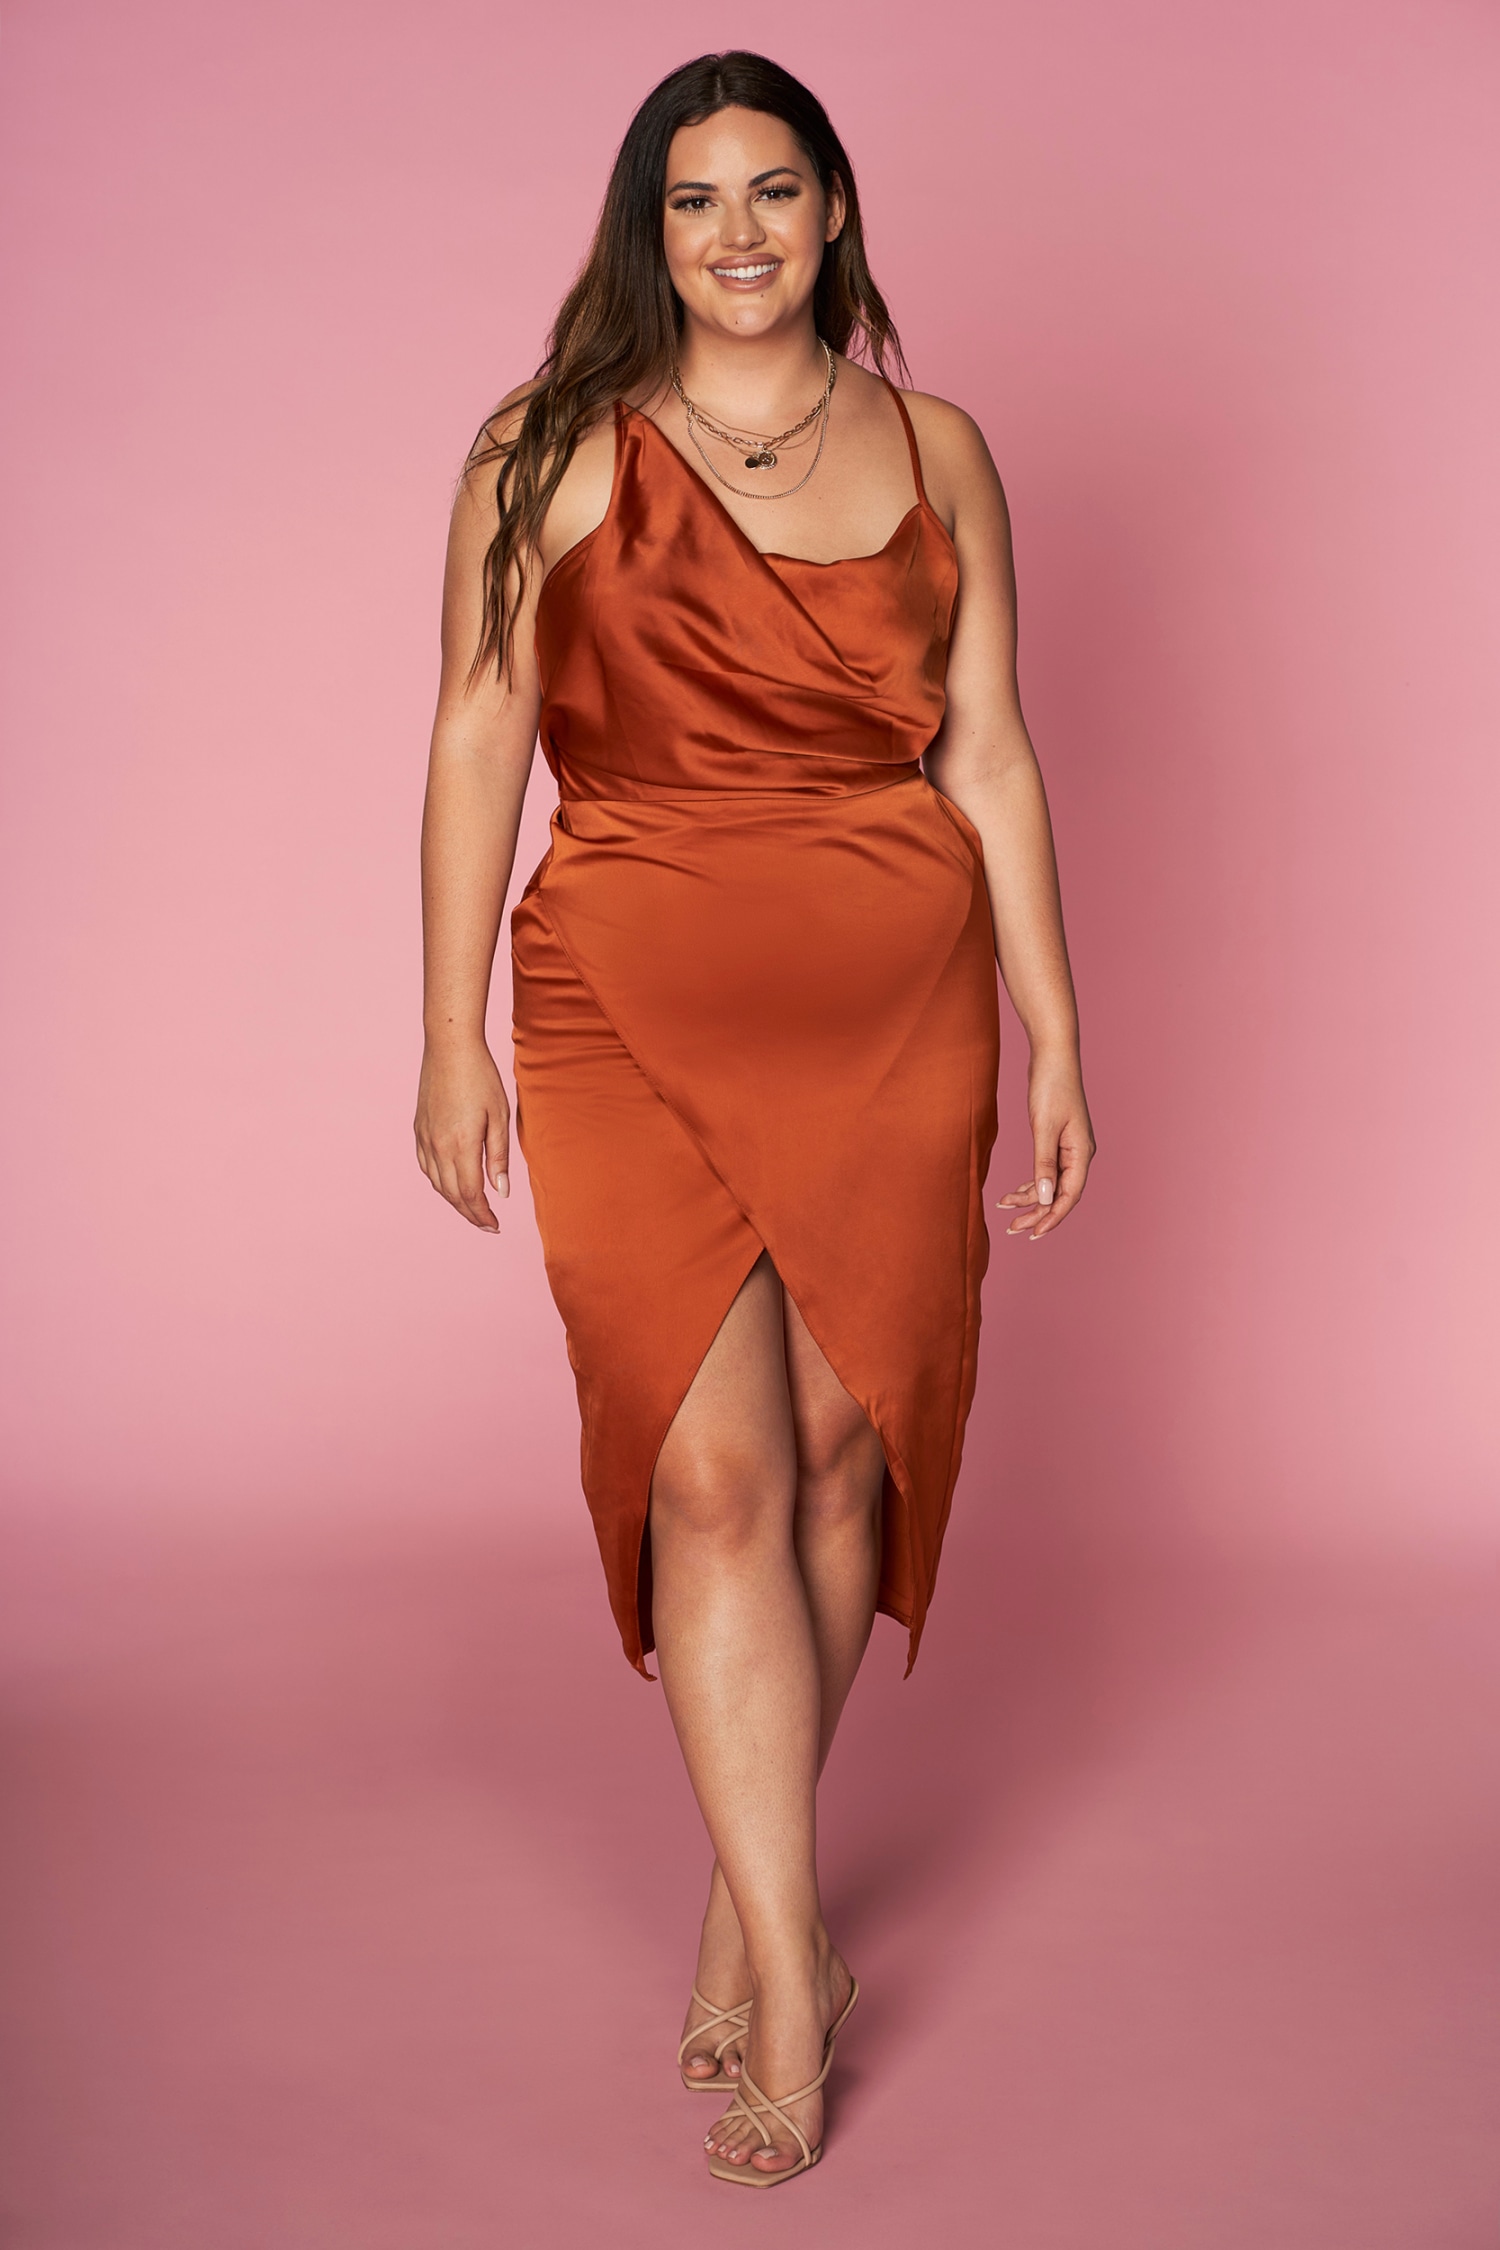 Alexa Alfia Talks Being Love Is Blind's First Curvy Contestant